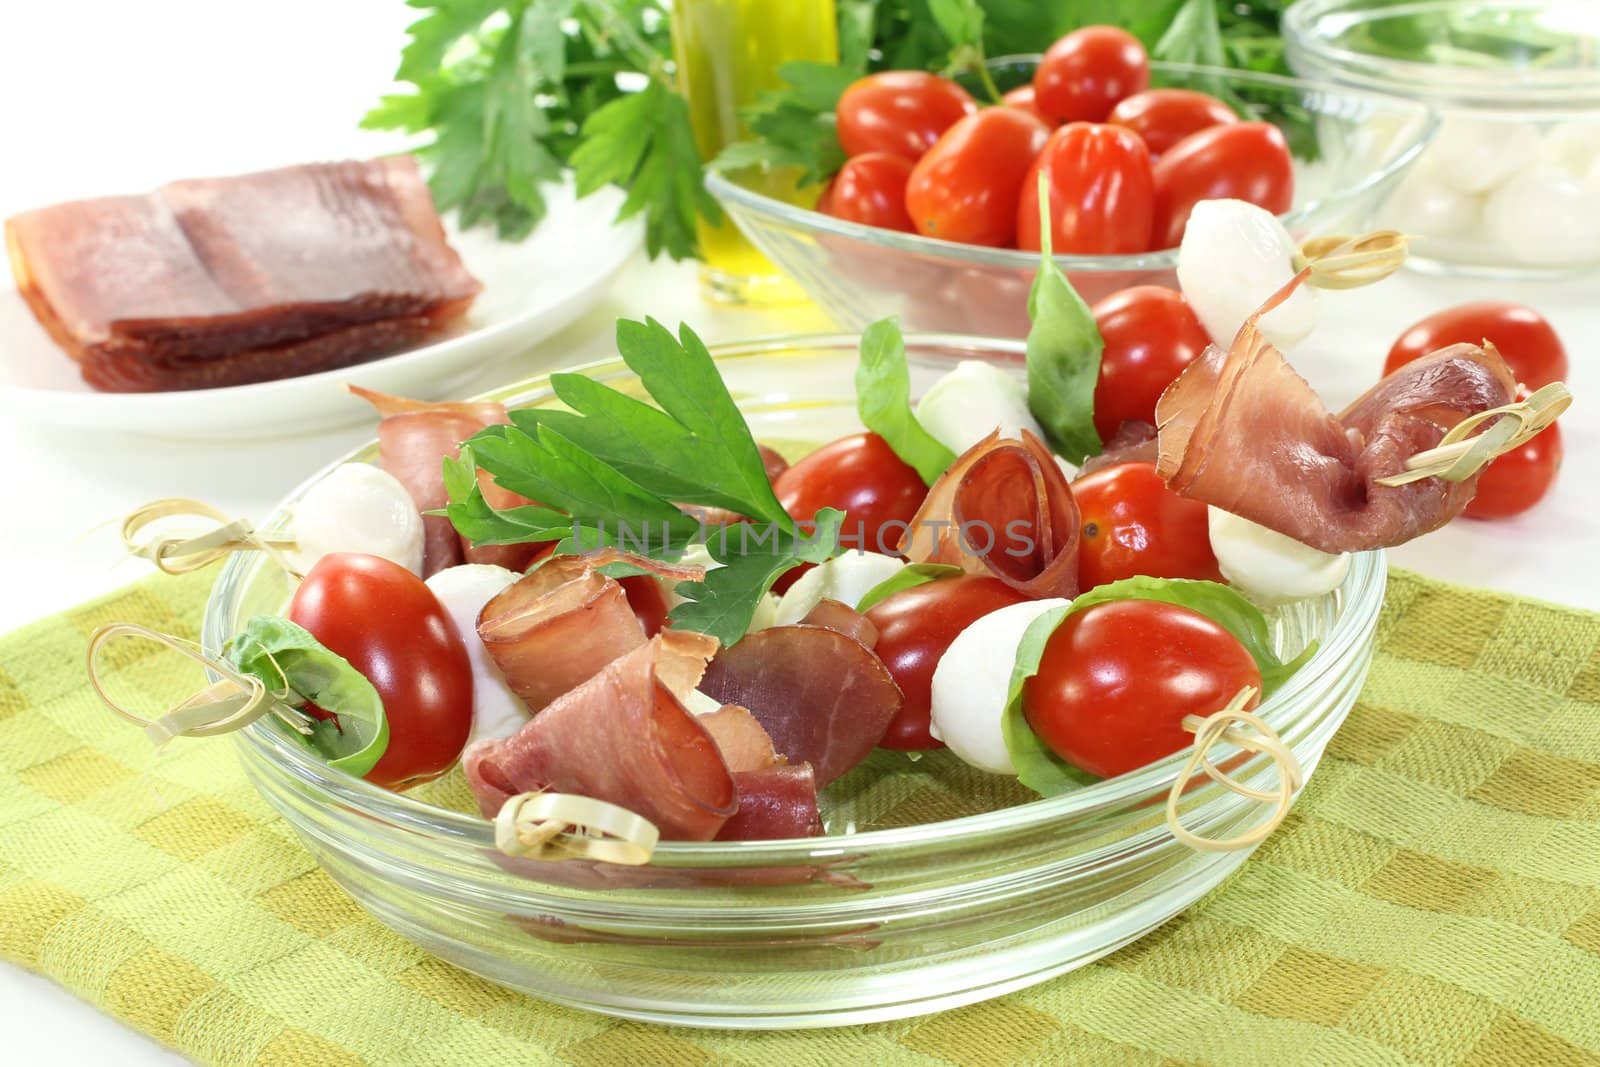 Tomato, mozzarella and ham skewers with basil by discovery